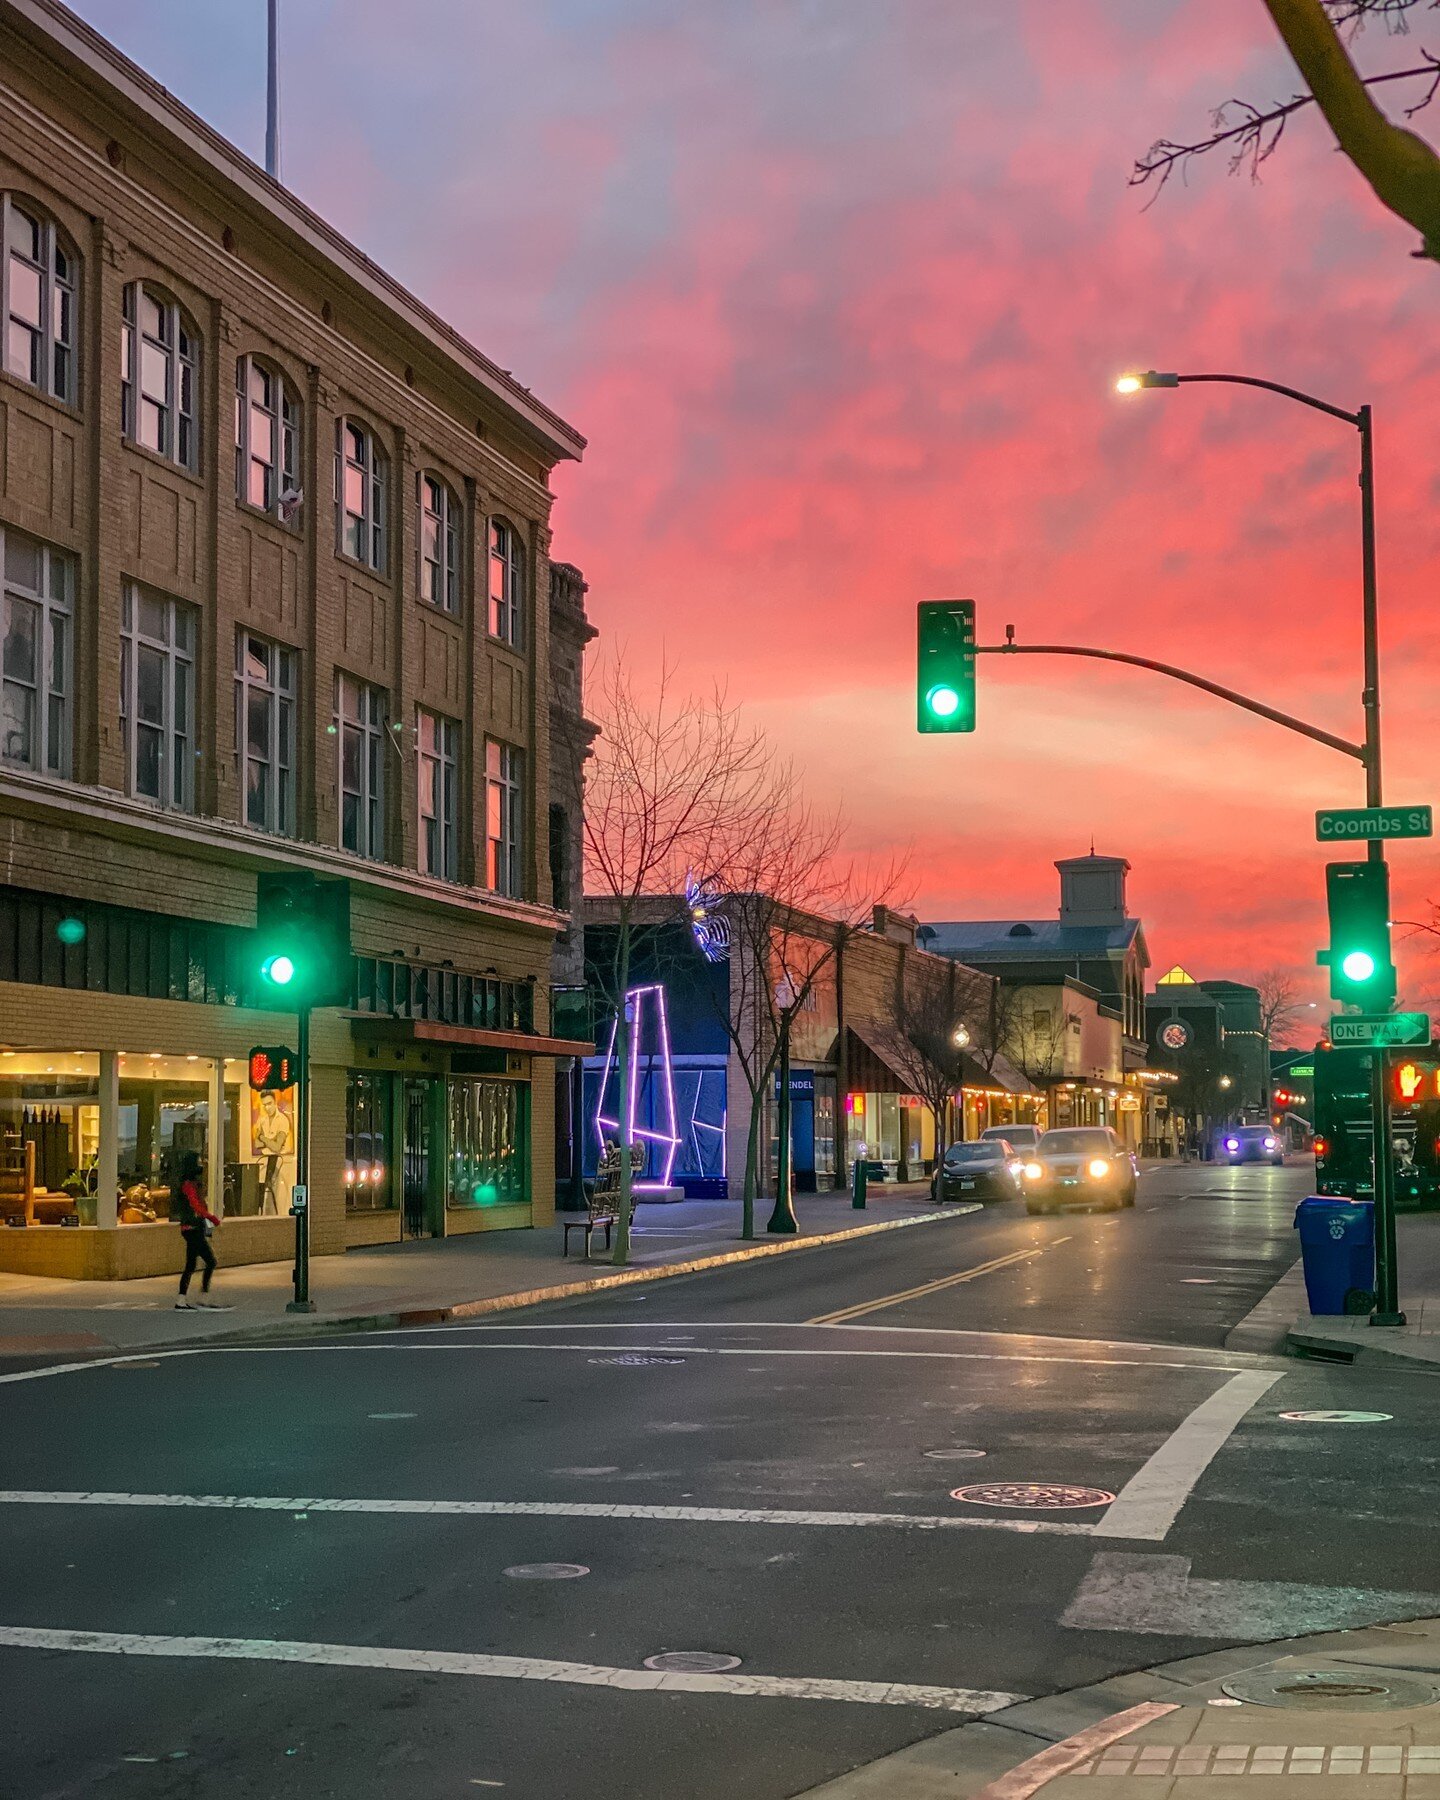 Napa's sunsets are getting in on the Light Festival action! 🌆